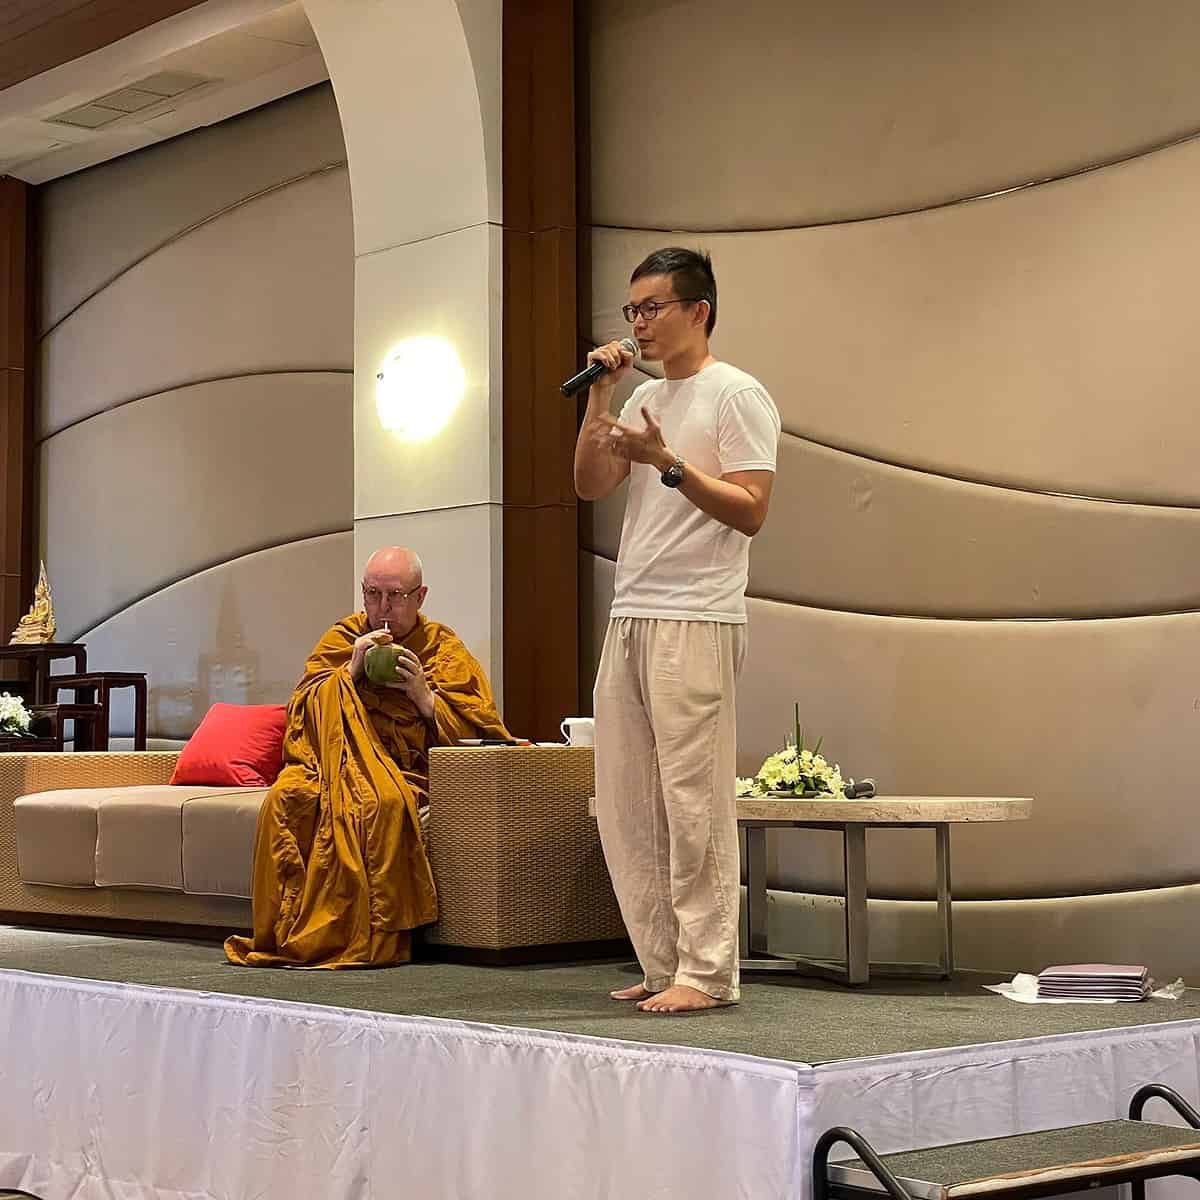 Man holding microphone on a stage, next to a monk on a sofa drinking from a coconut.